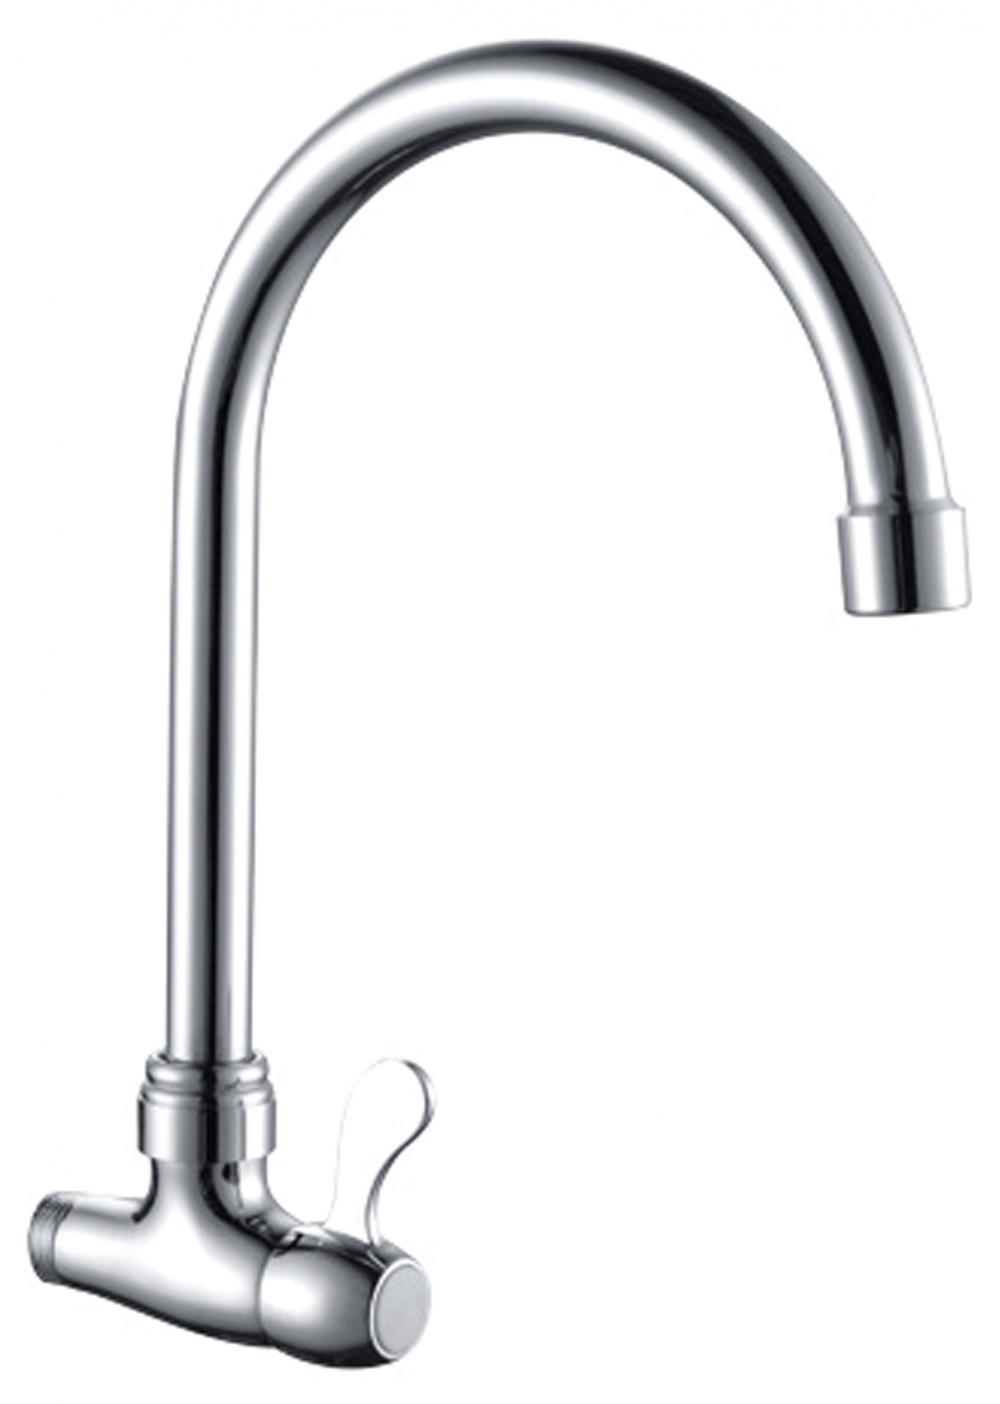 cold kitchen faucets